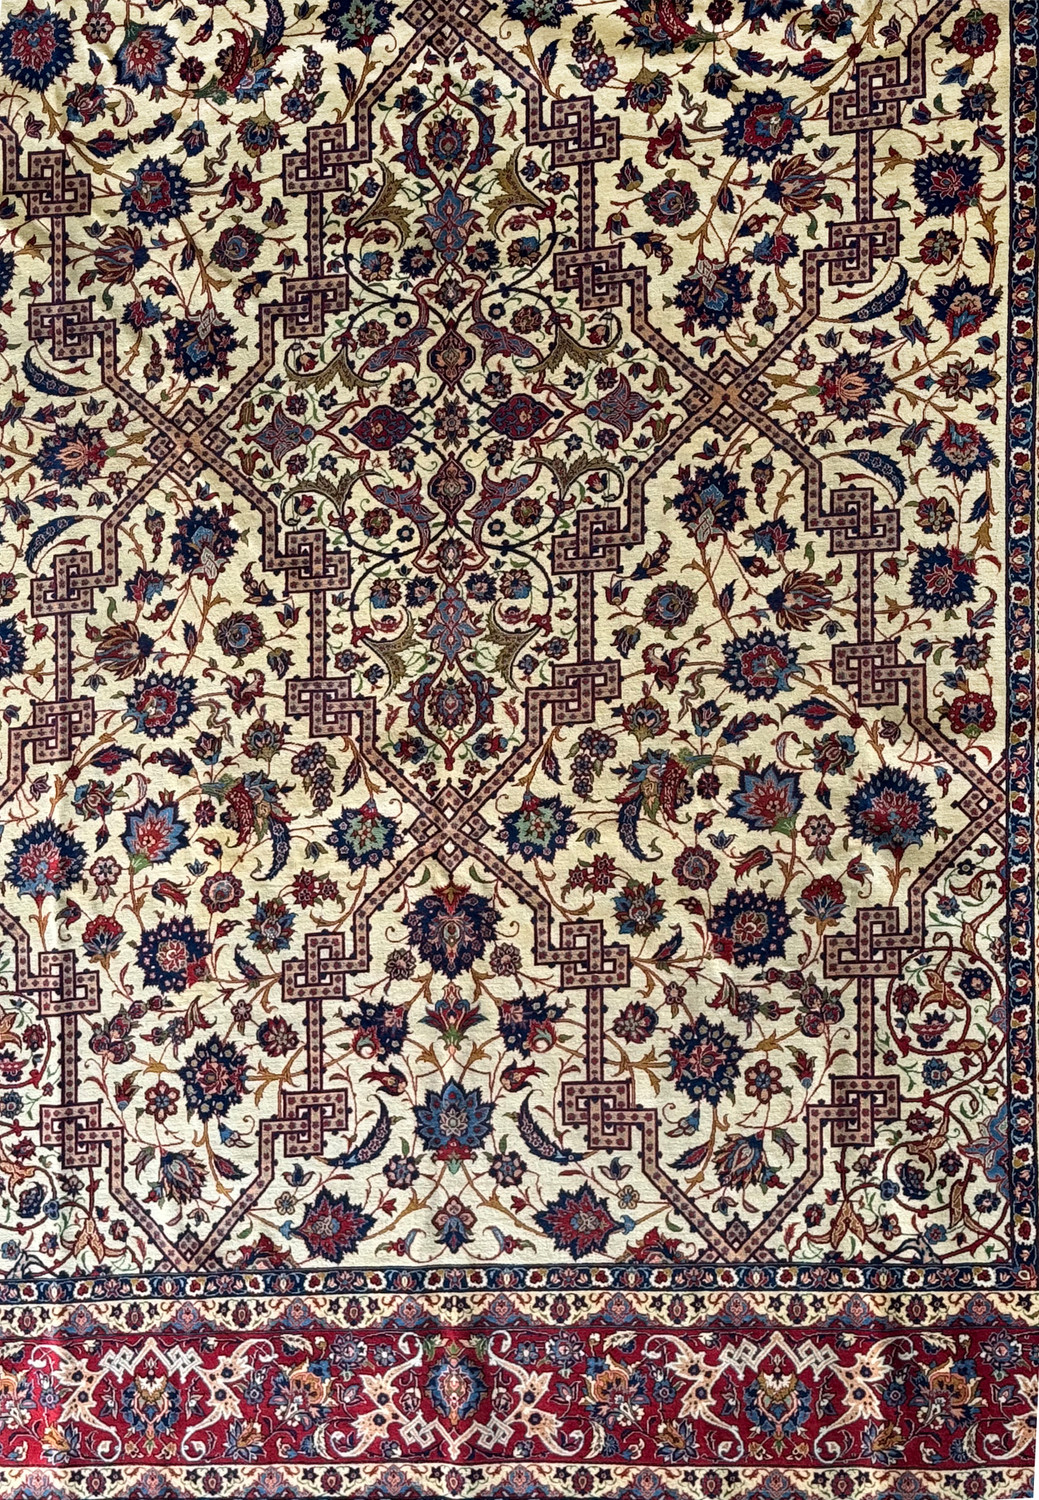 Close-up of the rug's central design and part of the main border, emphasizing the detailed motifs and vibrant colors.